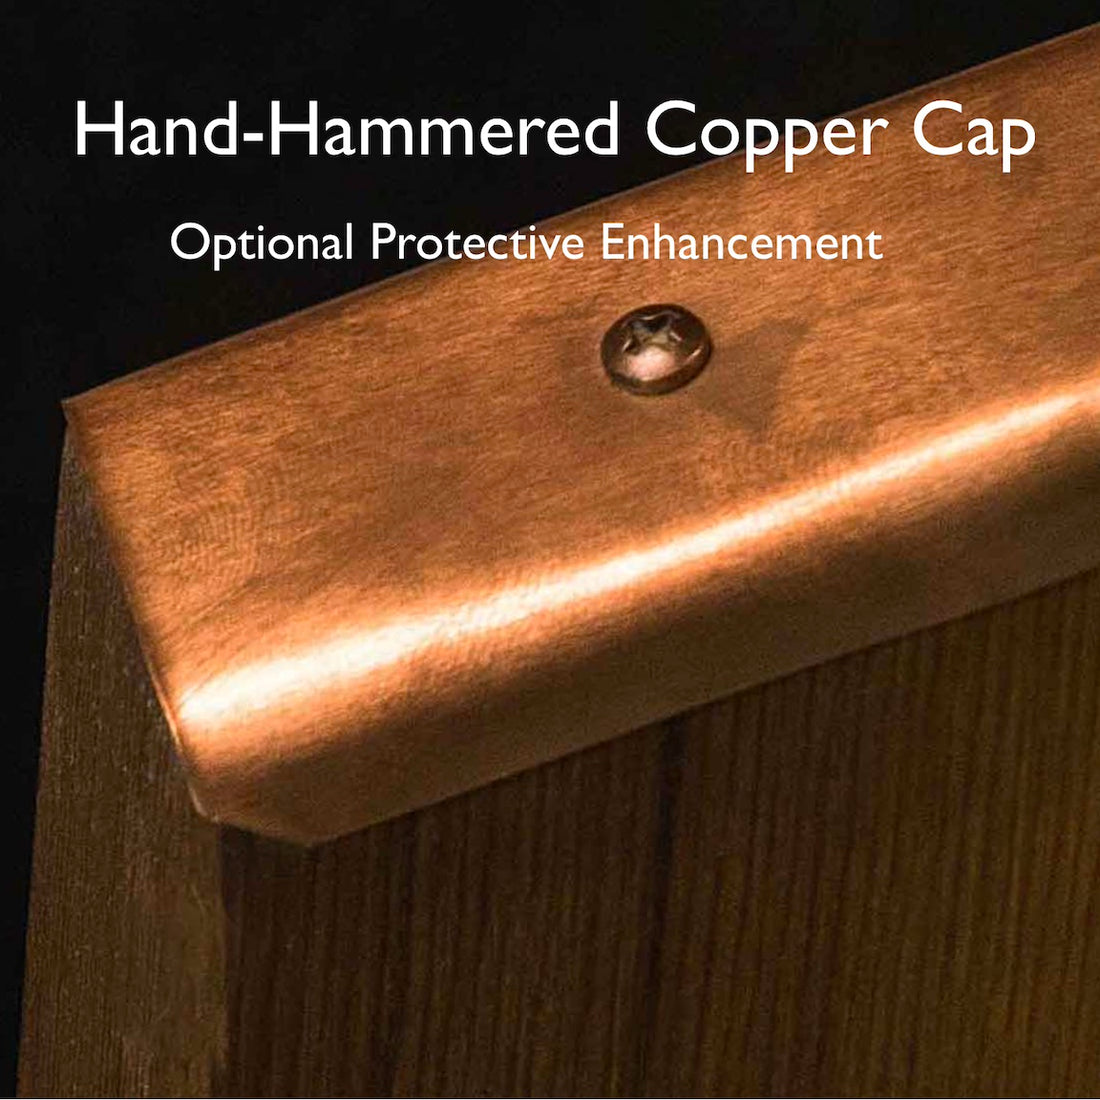 Hand-Hammered Copper Caps: Protection and Style